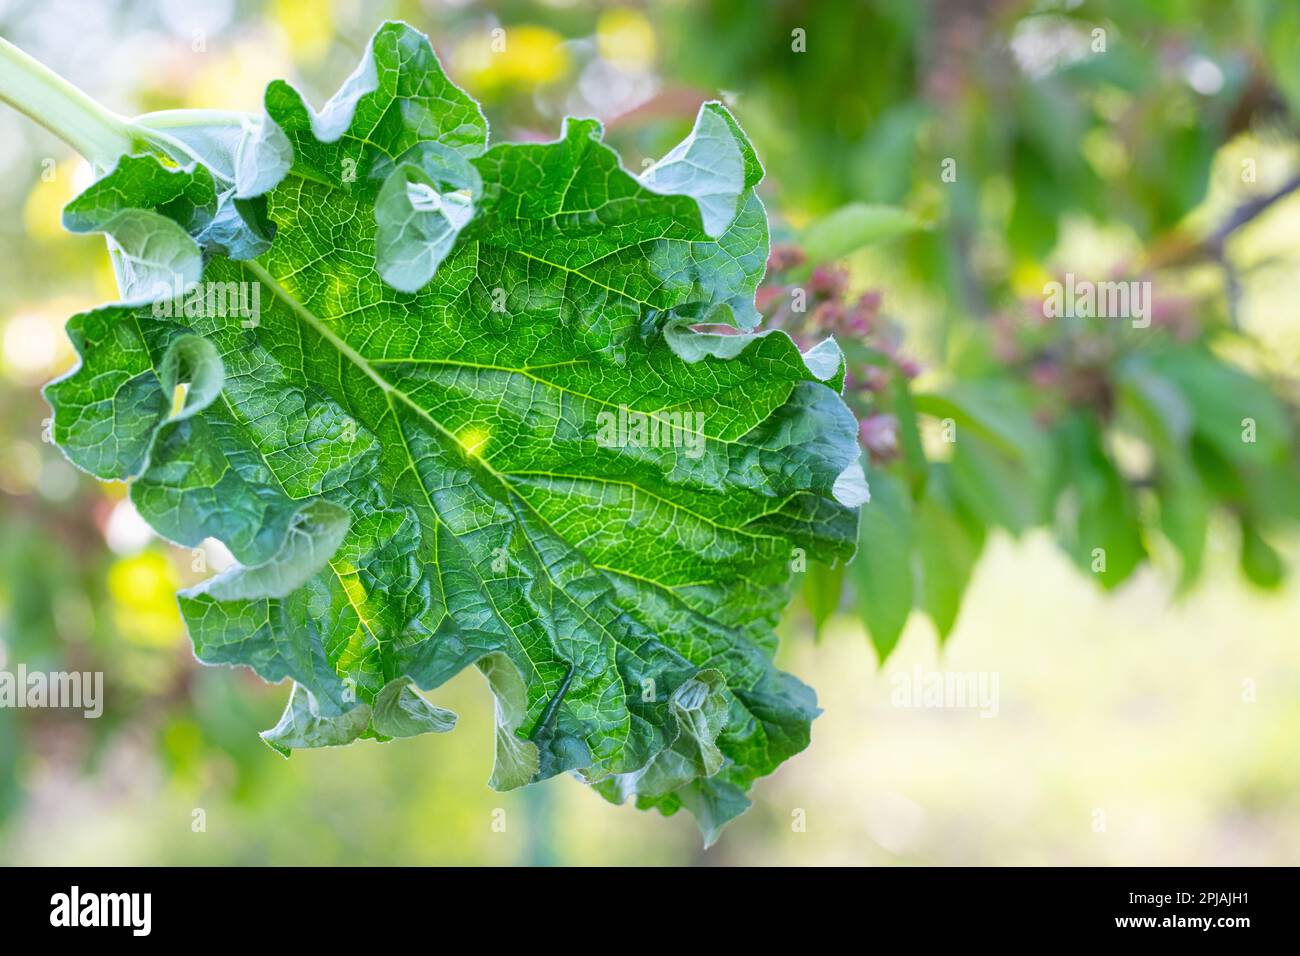 Rhubarb leaf, fresh and green. On a defocused natural background. Close-up, selective focus. Stock Photo